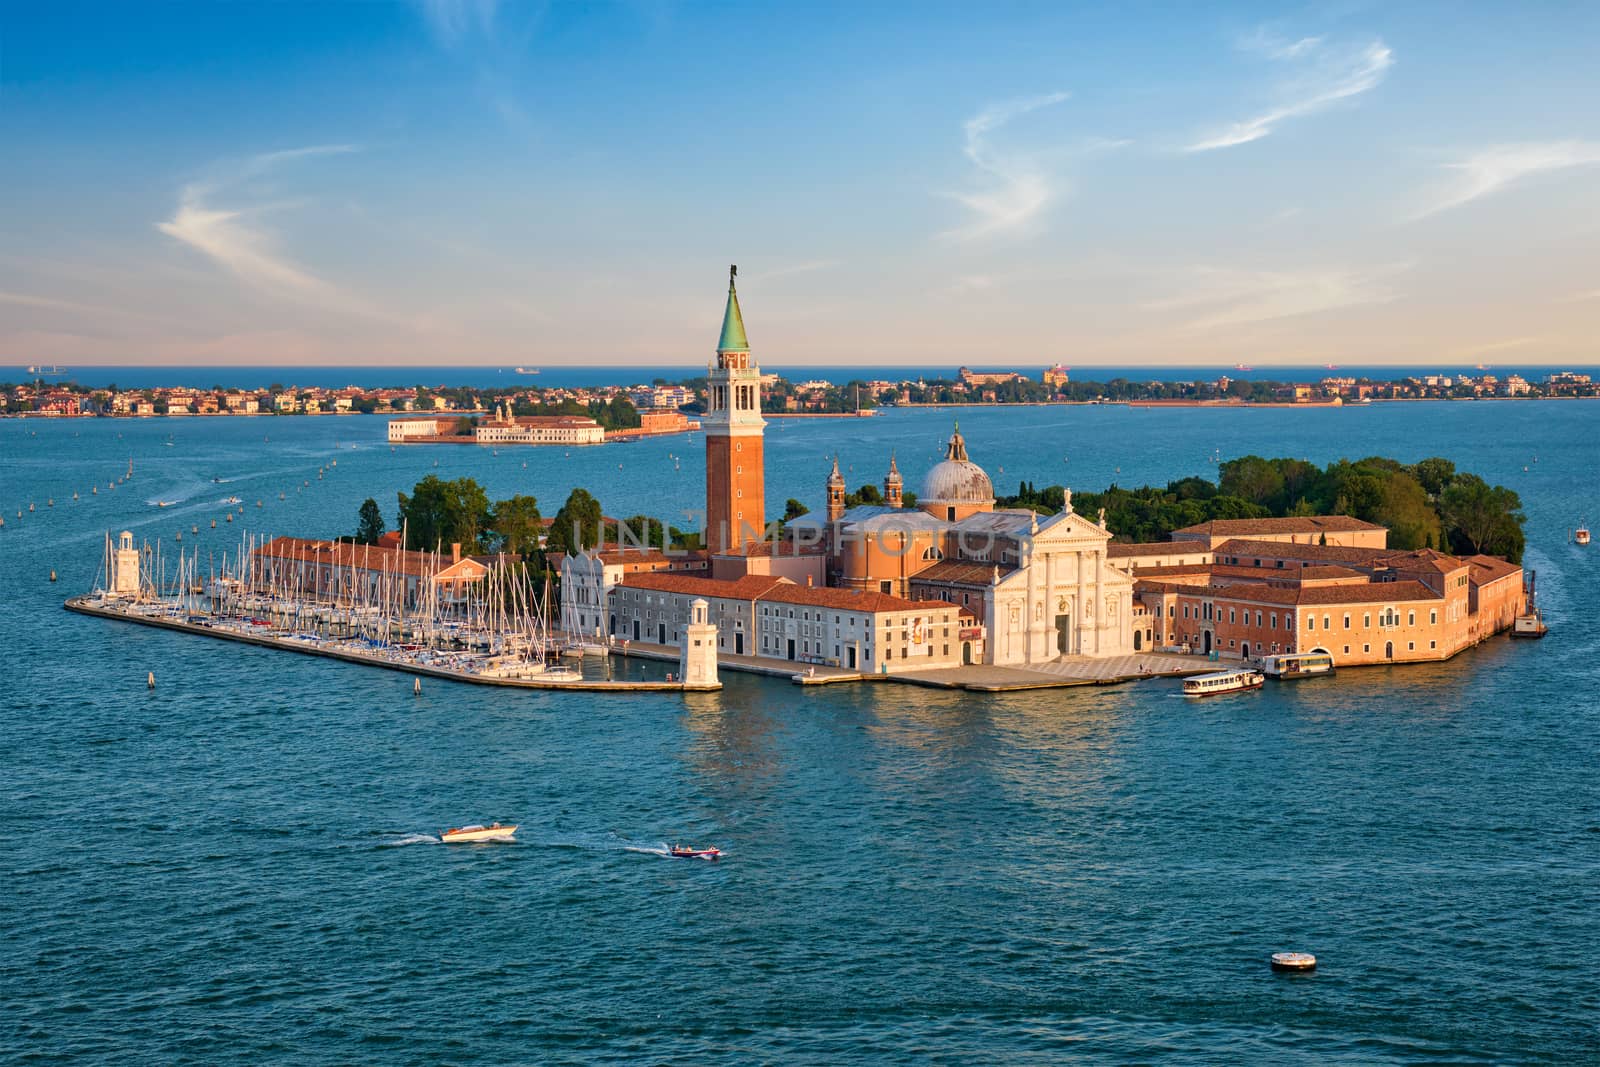 Famous Italy tourist destination - aerial view of Venice lagoon and San Giorgio di Maggiore church with boats and vaporetto traffic on sunset from St Mark's Campanile bell tower, Venice, Italy